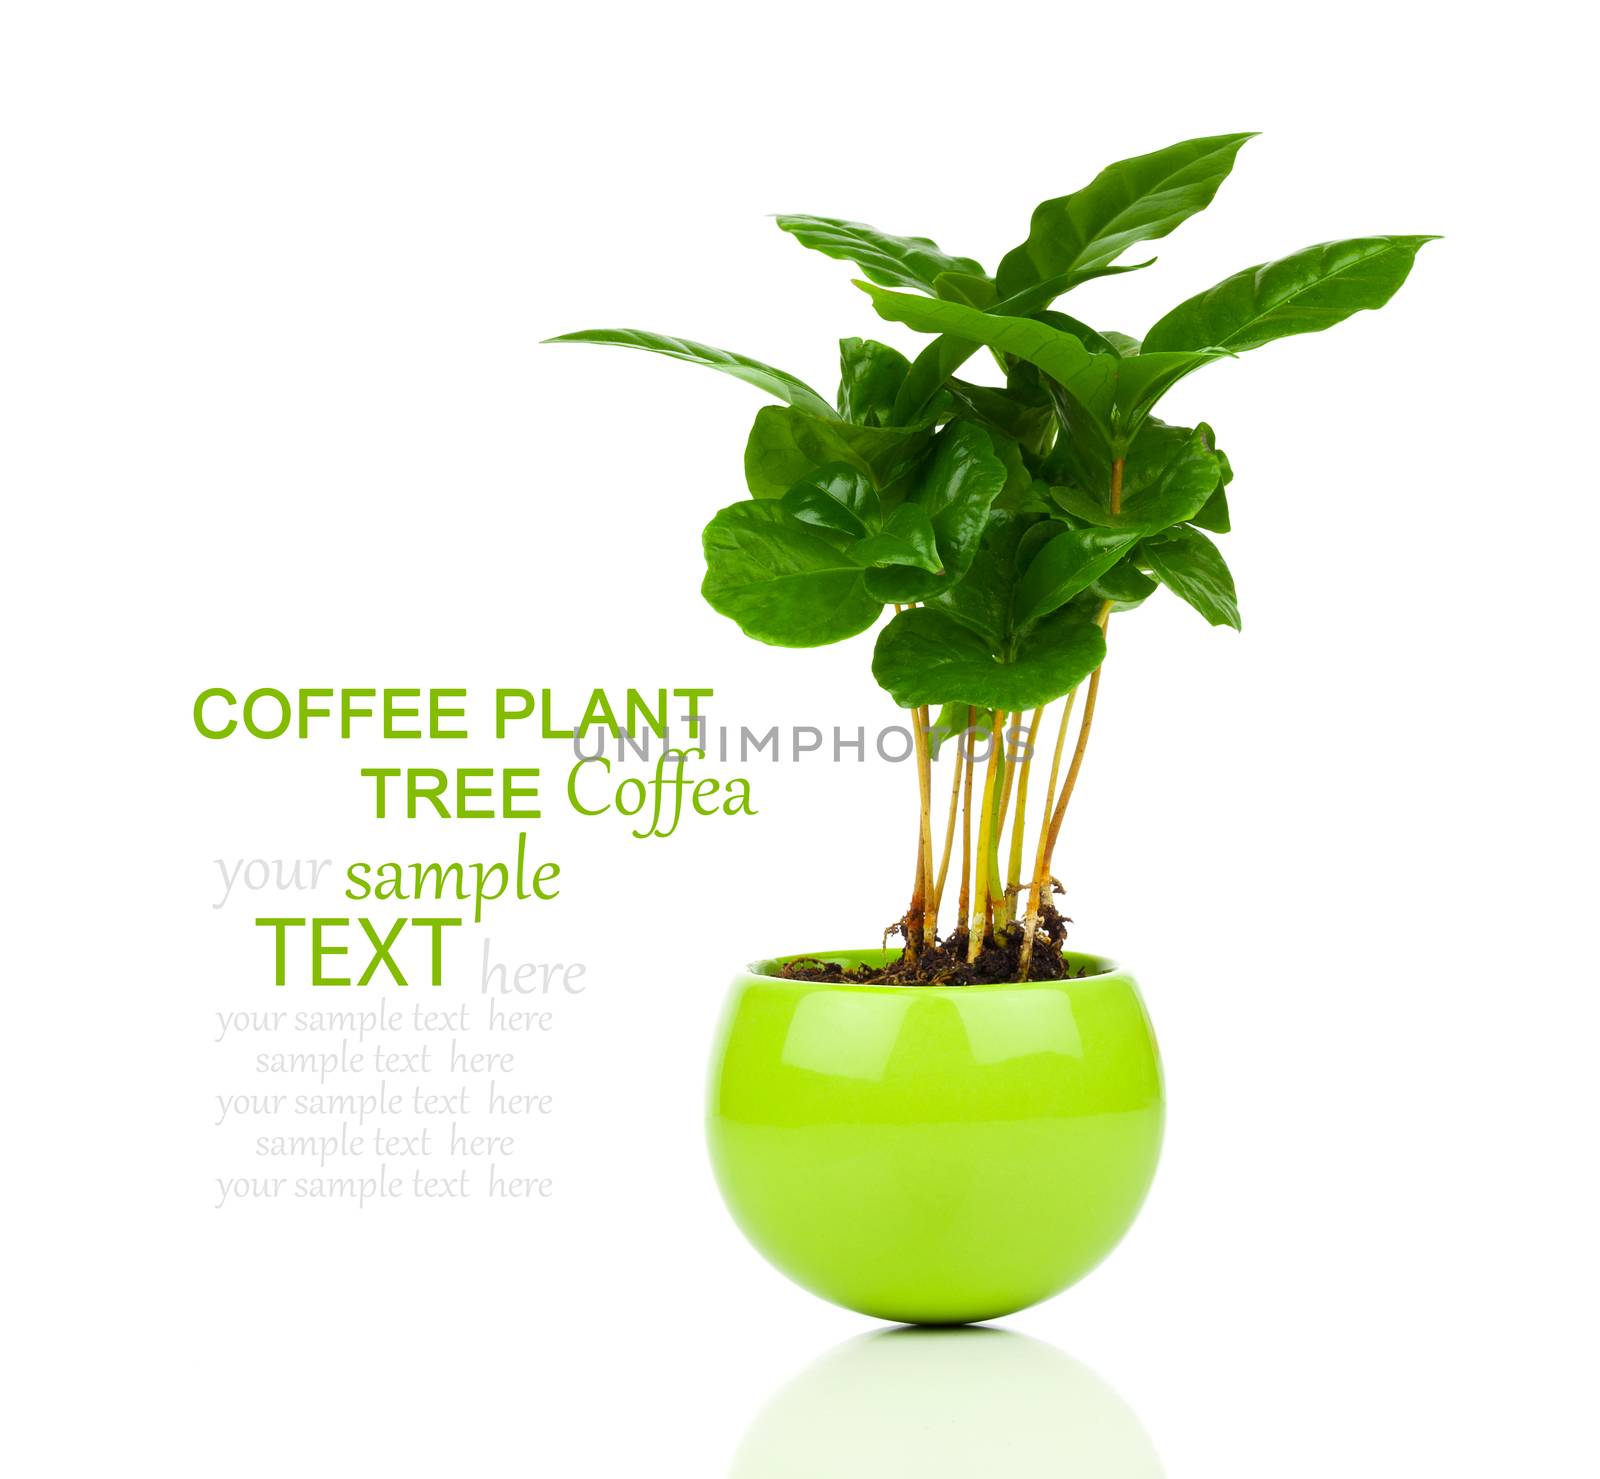 coffee plant tree growing seedling in soil pile isolated on white background